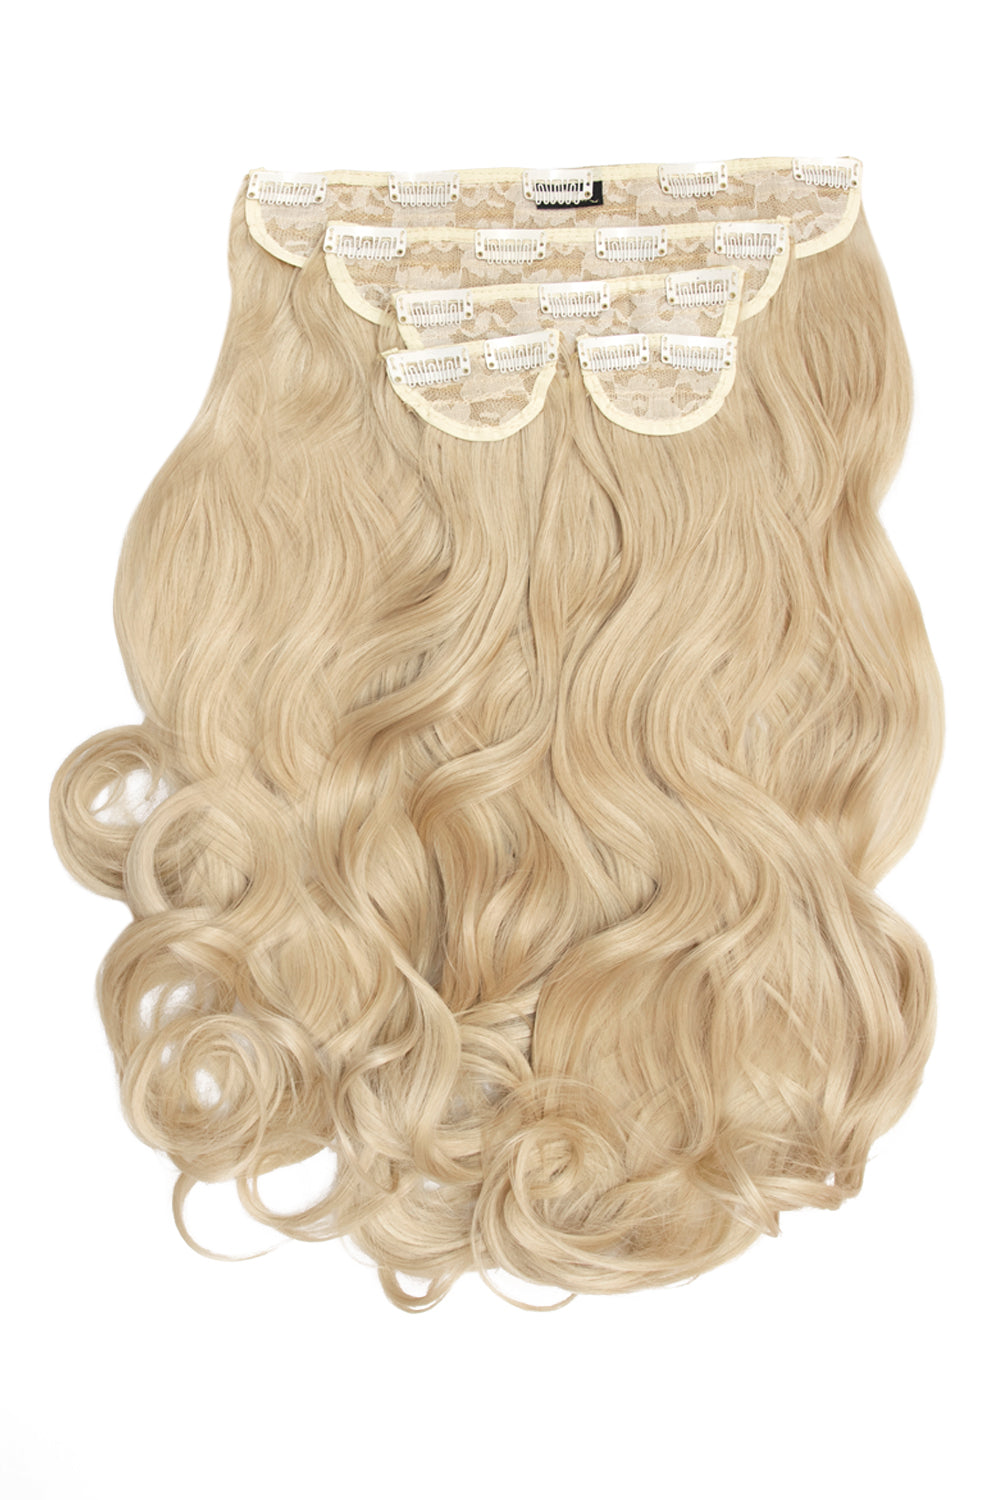 Super Thick 22" 5 Piece Curly Clip In Hair Extensions - California Blonde